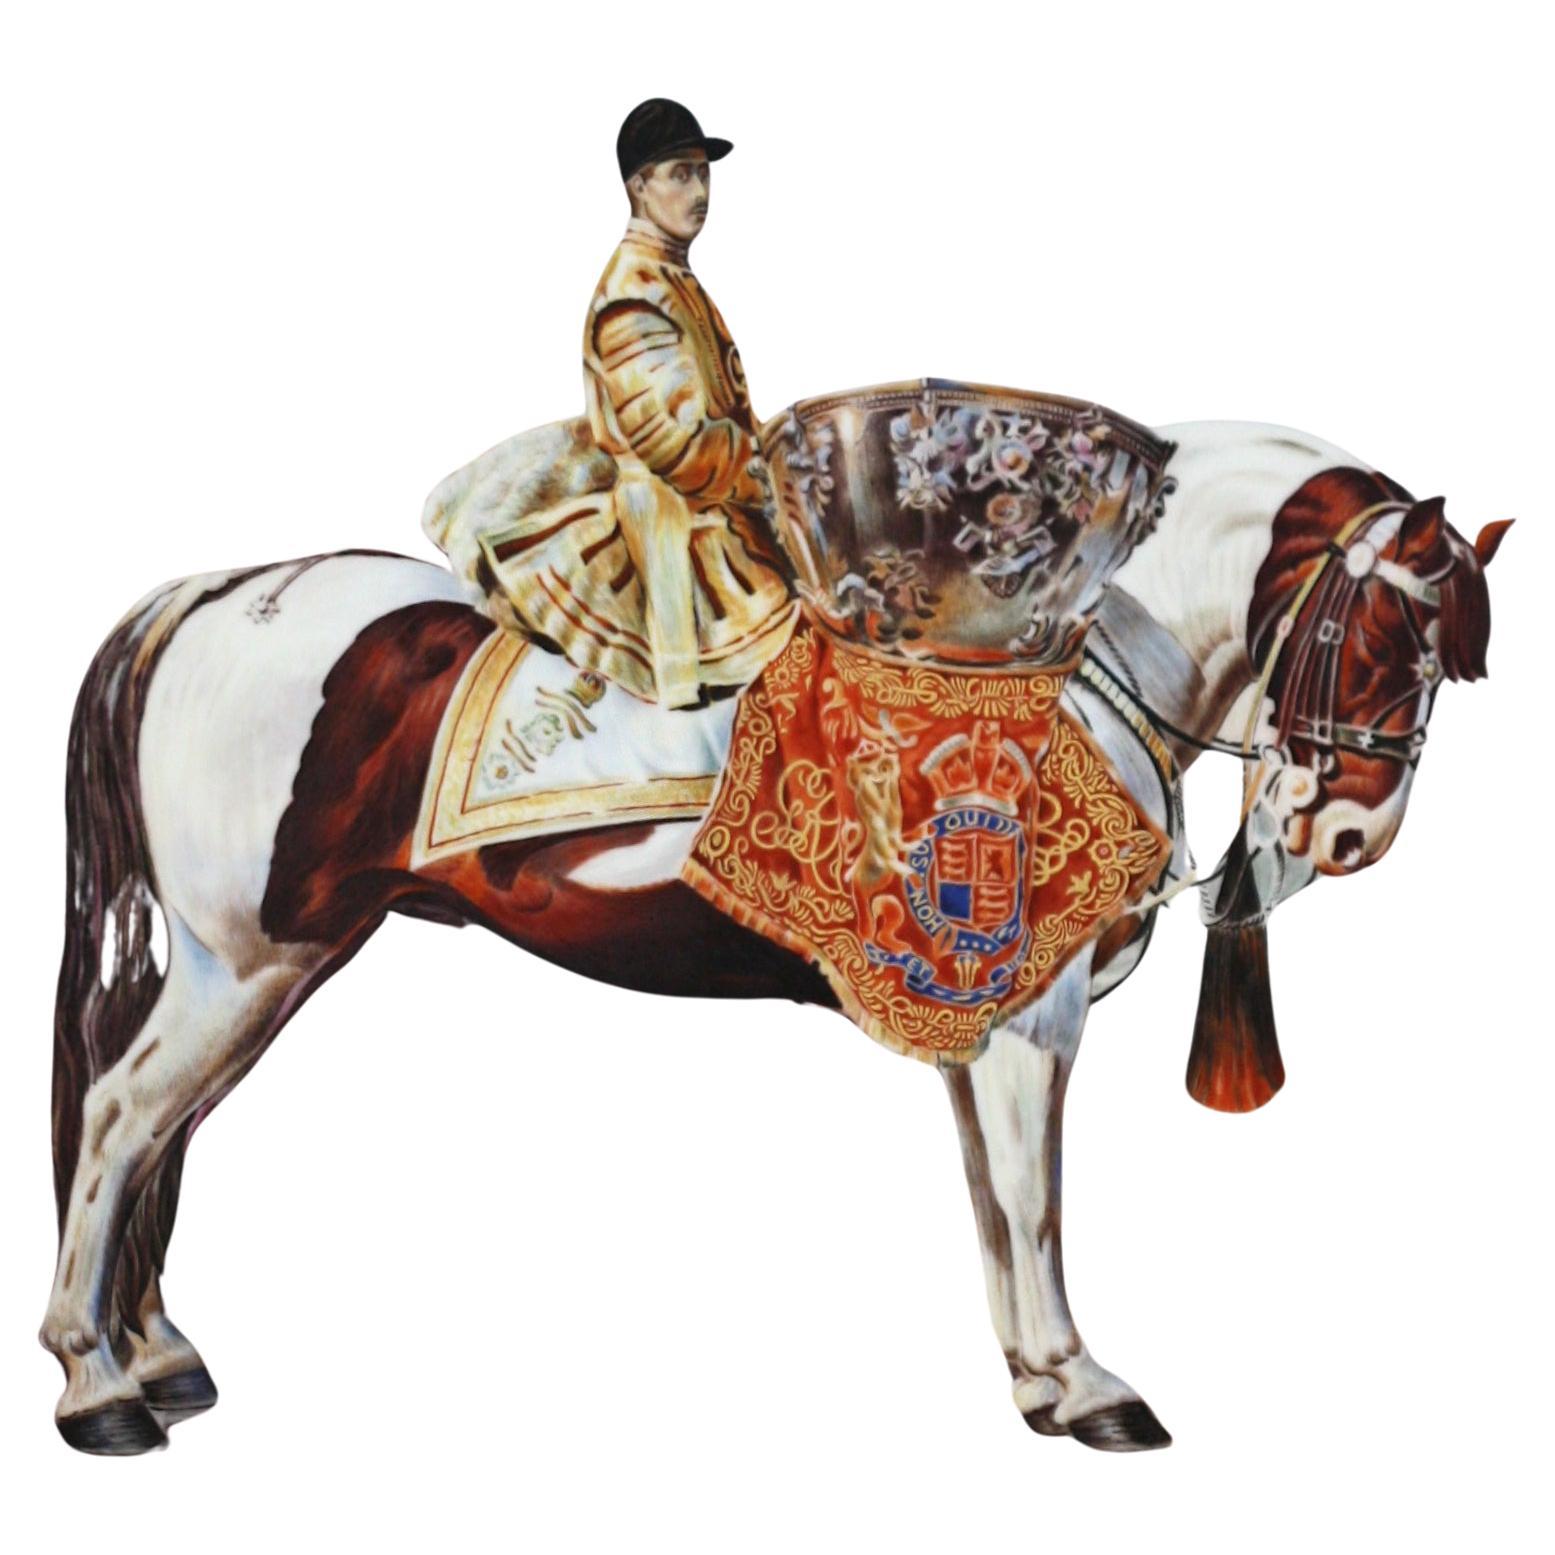 
Boehm Porcelain Equestrian Plaque
Marked, untitled, in a gilt frame.
14.25 by 11.5 in. (36.19 x 29.21 cm.), overall, in a gilt frame, 18.5 by 16.25 in. (46.99 x 41.27 cm.)
